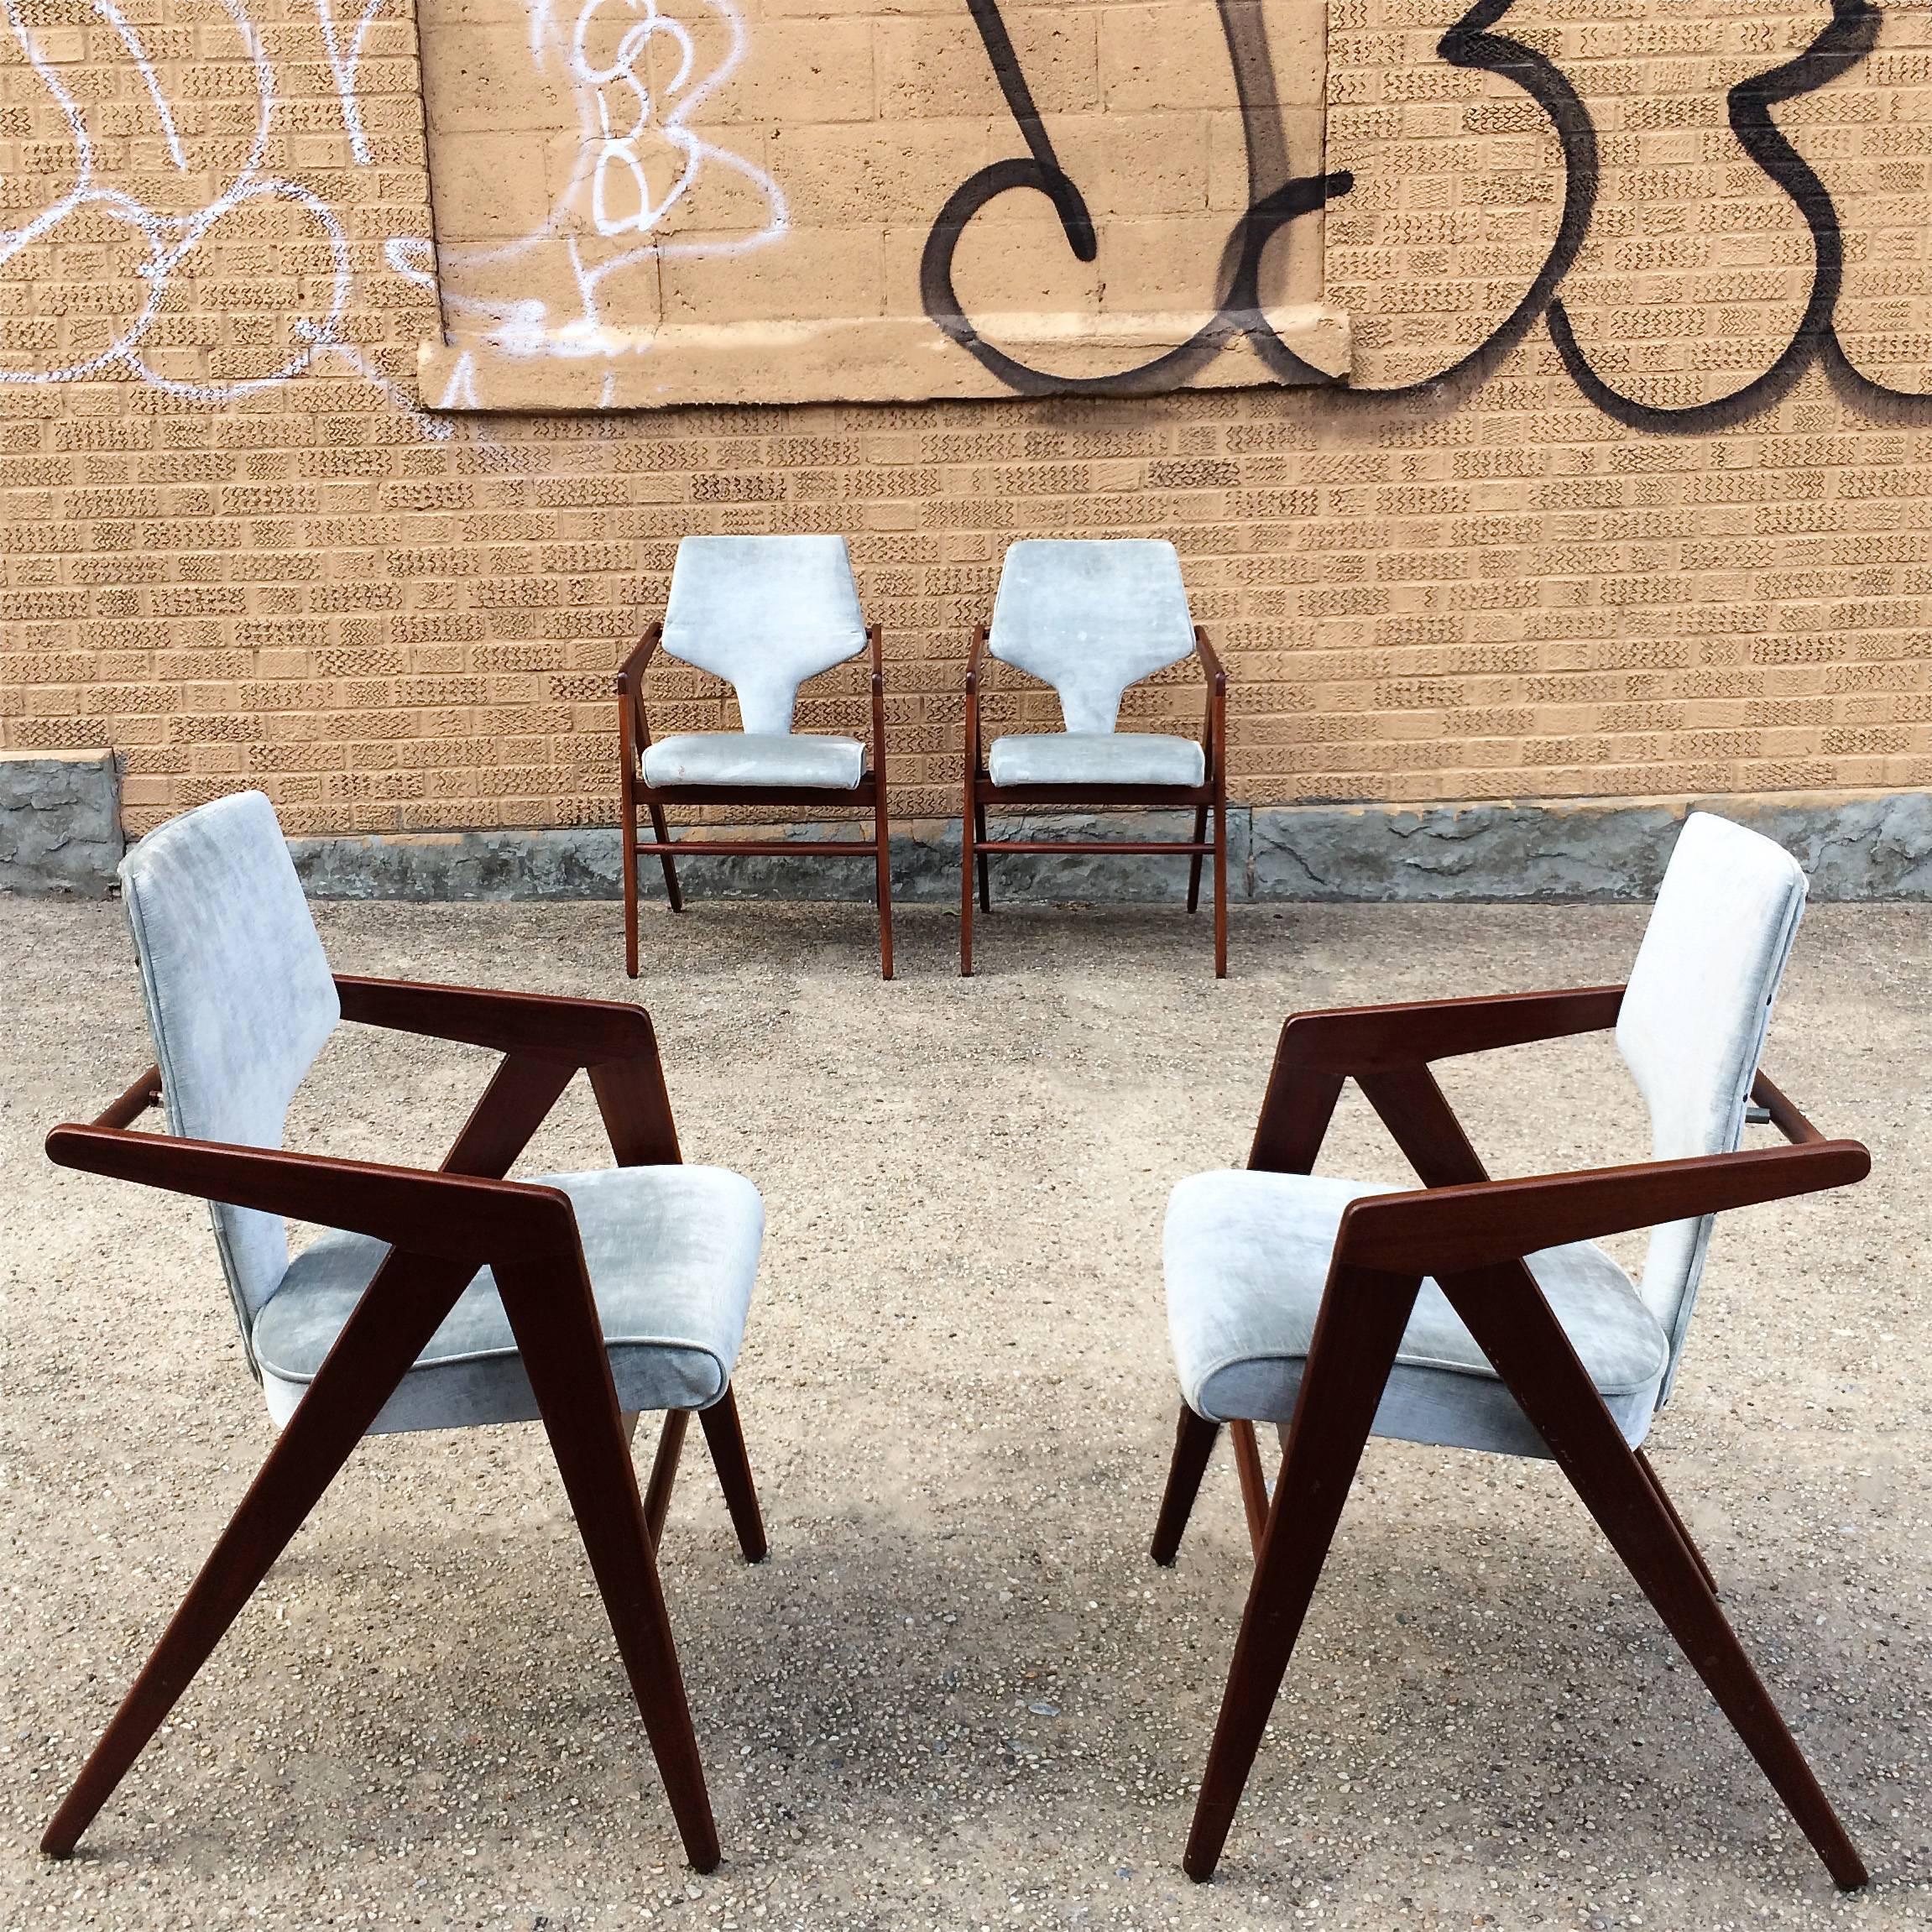 Set of four, rare teak compass chairs by Dutch born sculptor and draftsman Cornelis Zitman for Tecoteca, Furniture designed for the Hotel Humboldt, Caracas Venezuela 1955. These stunning, limited edition, dining armchairs sport dramatic,